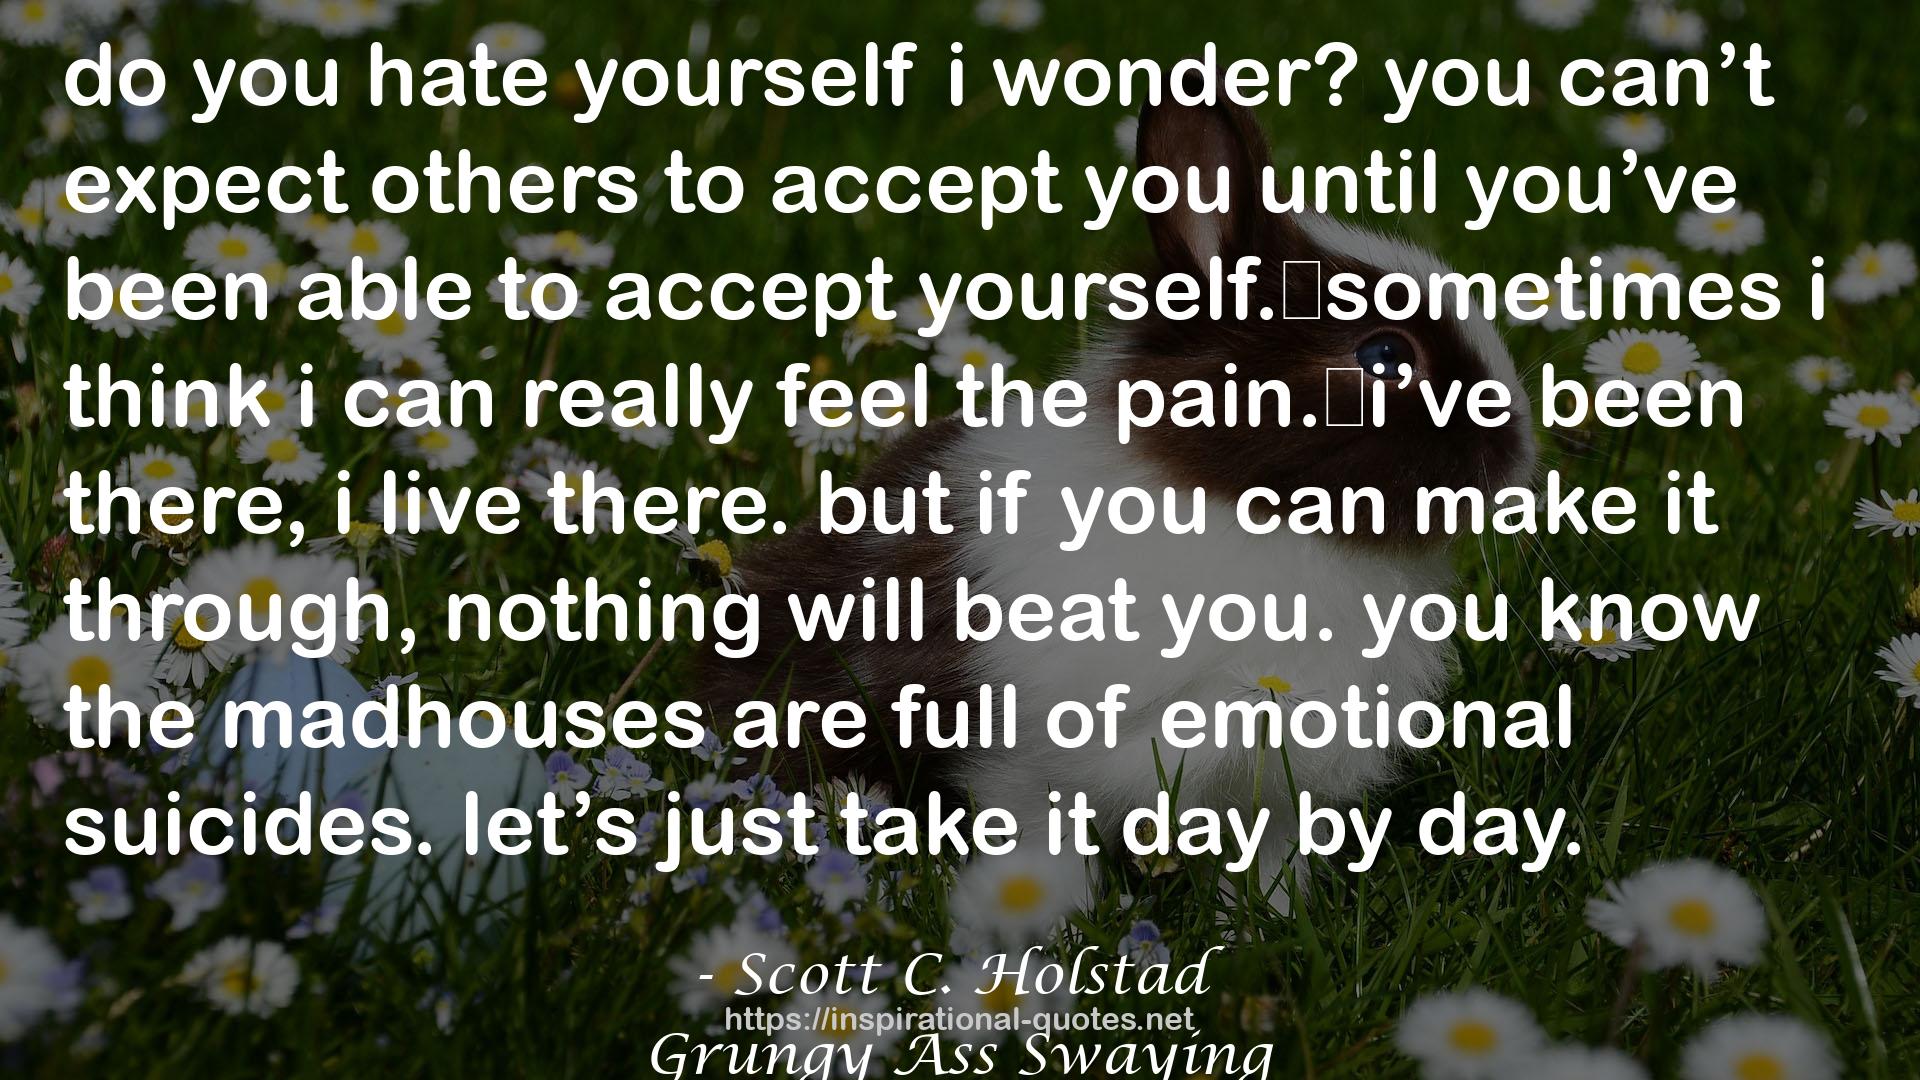 Scott C. Holstad quote : do you hate yourself i wonder? you can’t expect others to accept you until you’ve been able to accept yourself.	sometimes i think i can really feel the pain.	i’ve been there, i live there. but if you can make it through, nothing will beat you. you know the madhouses are full of emotional suicides. let’s just take it day by day.